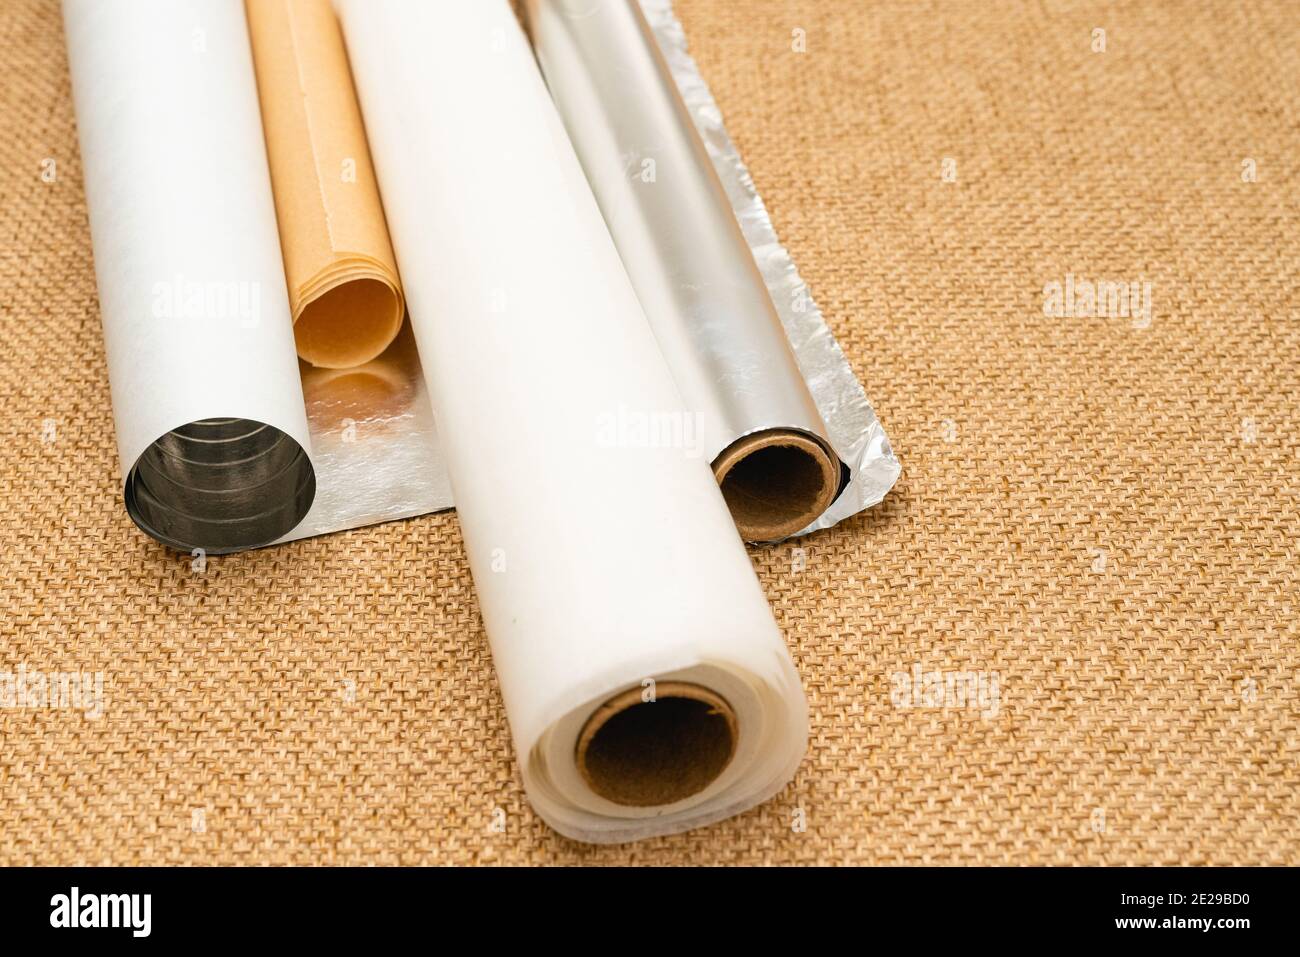 What Is the Difference Between Parchment Paper and Wax Paper?